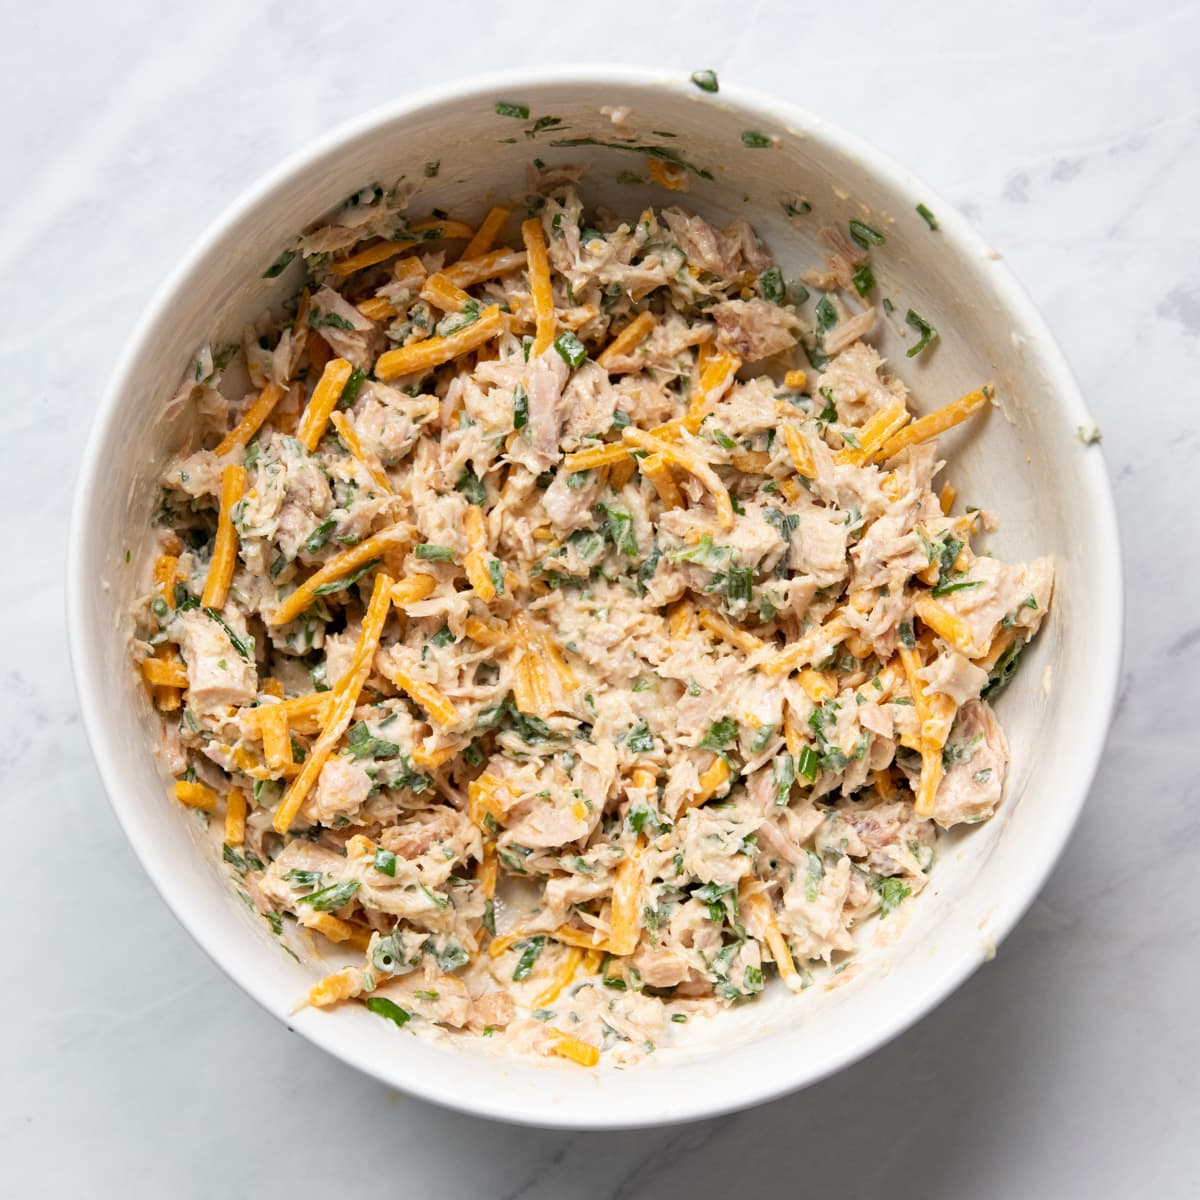 Canned tuna salad with cheddar cheese in a bowl